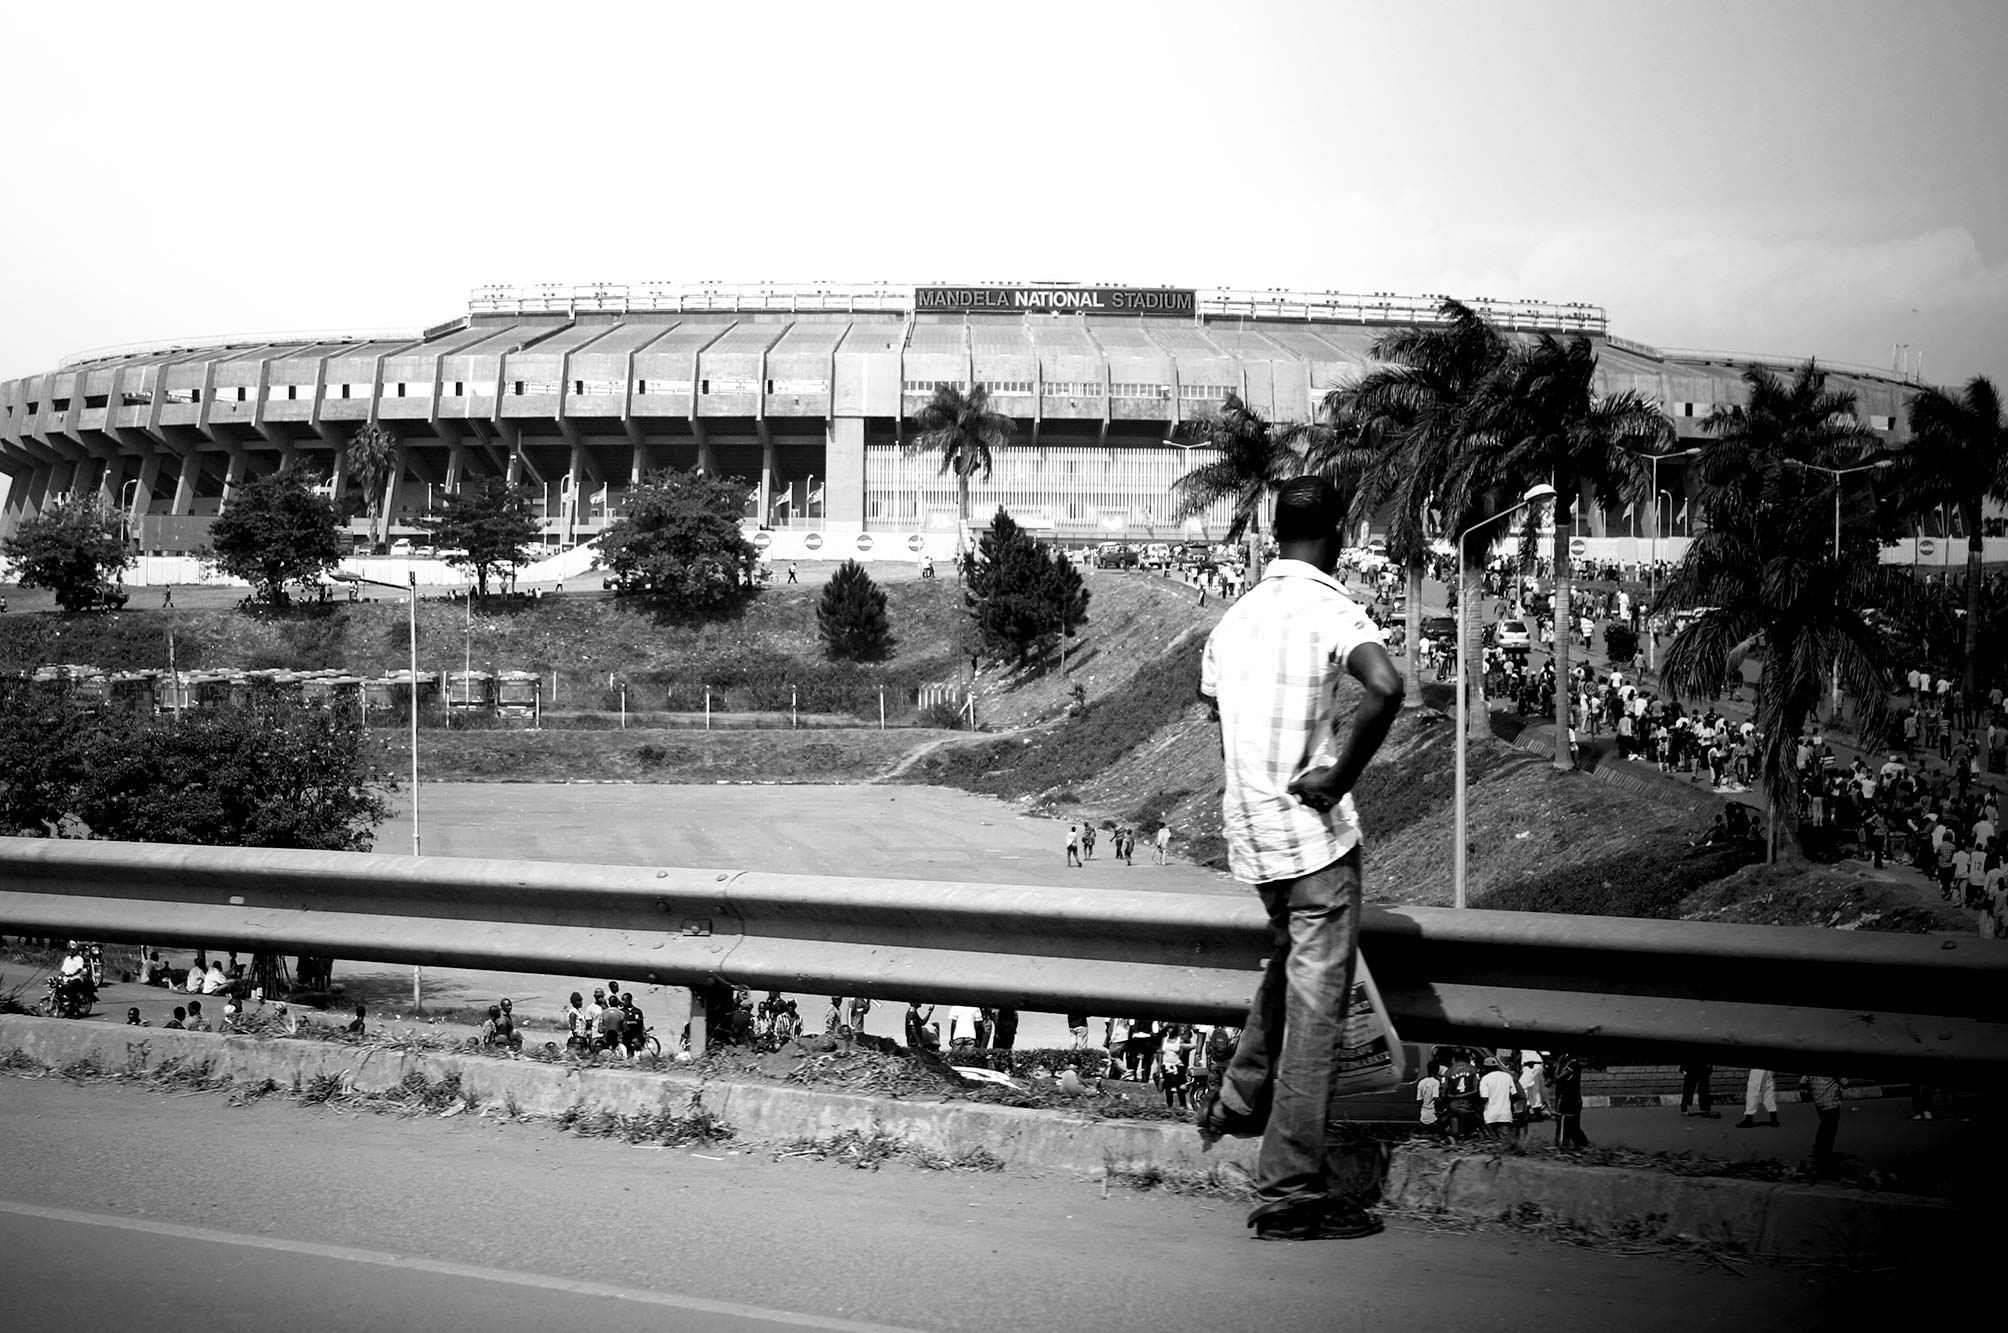 Mandela National Stadium, man looking out at the crowds